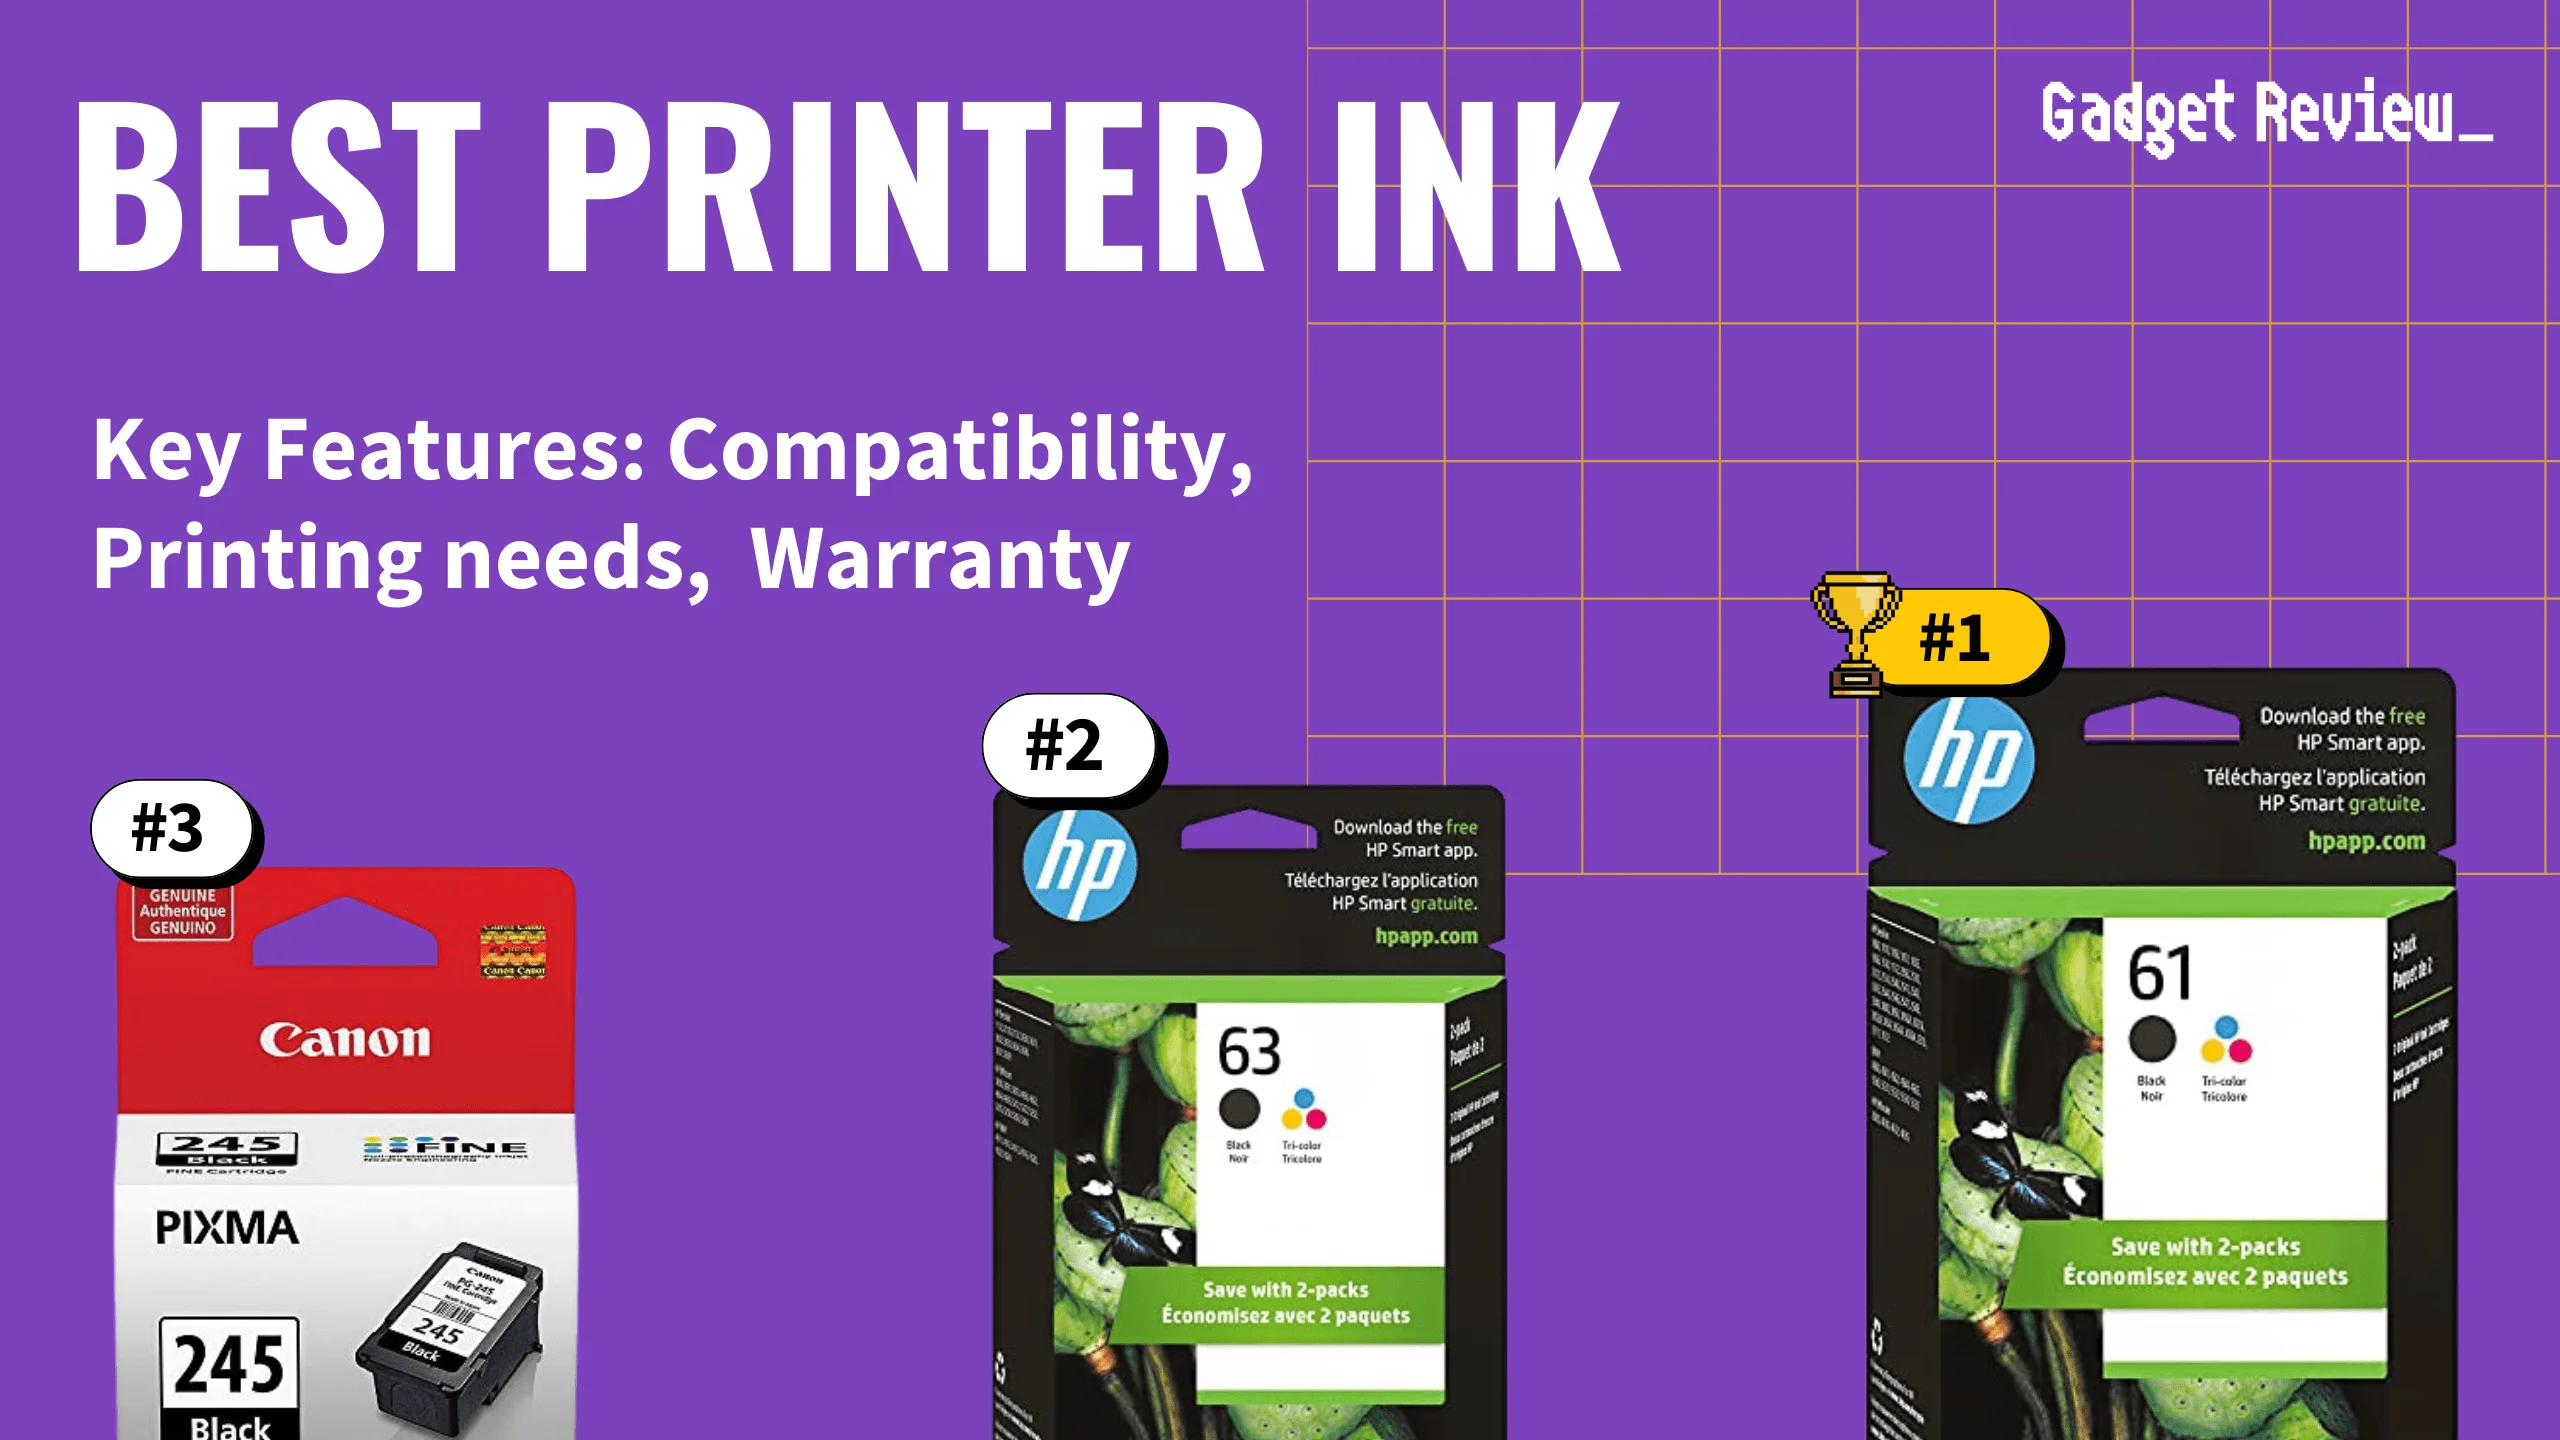 best printer ink featured image that shows the top three best printer models